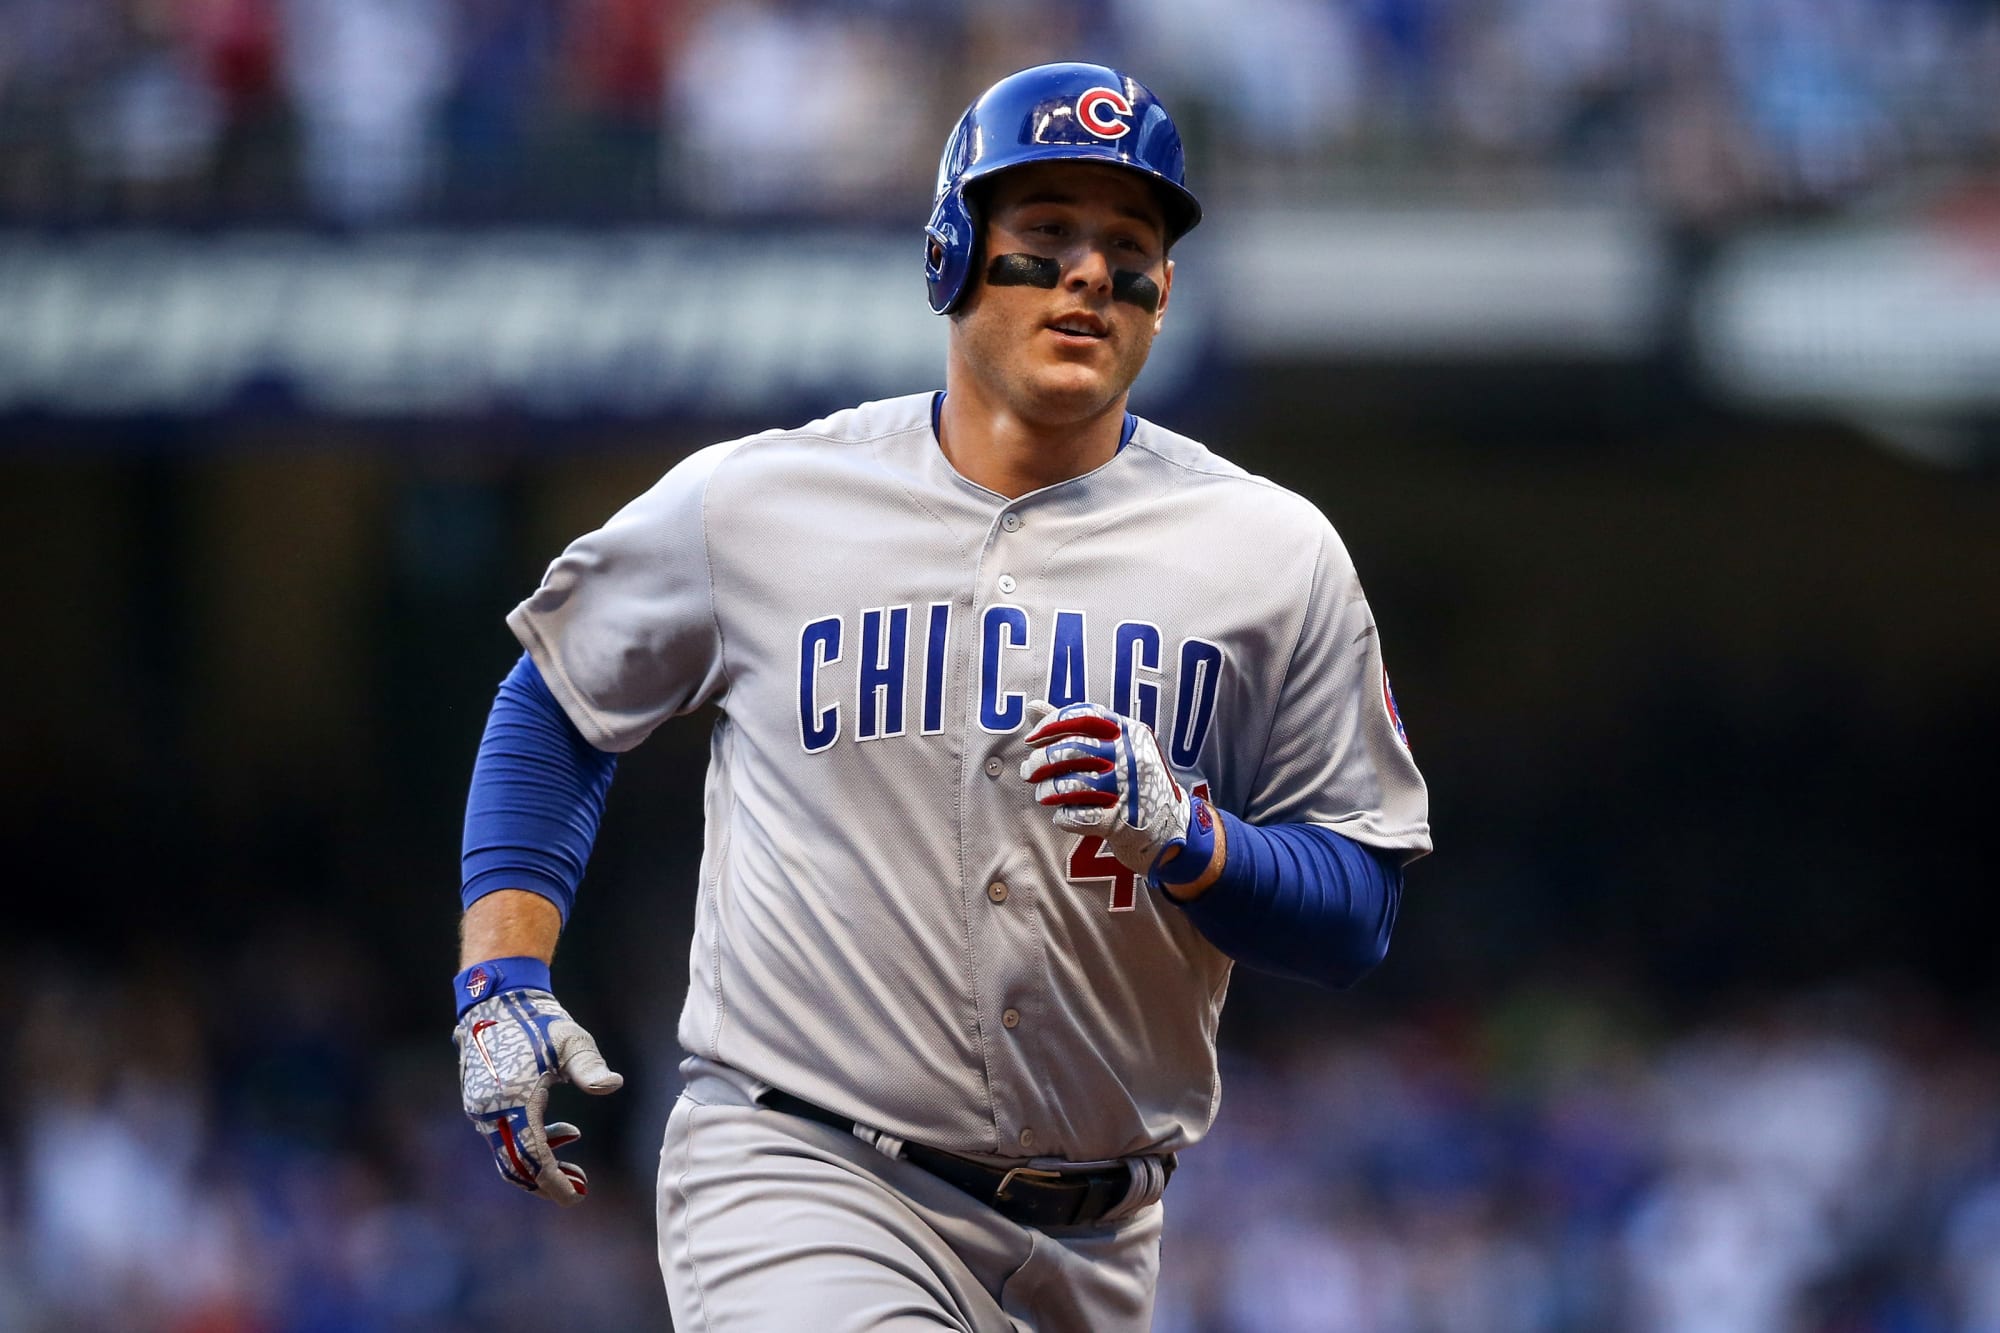 Cubs star Anthony Rizzo is hardly recognizable after impressive weight loss...